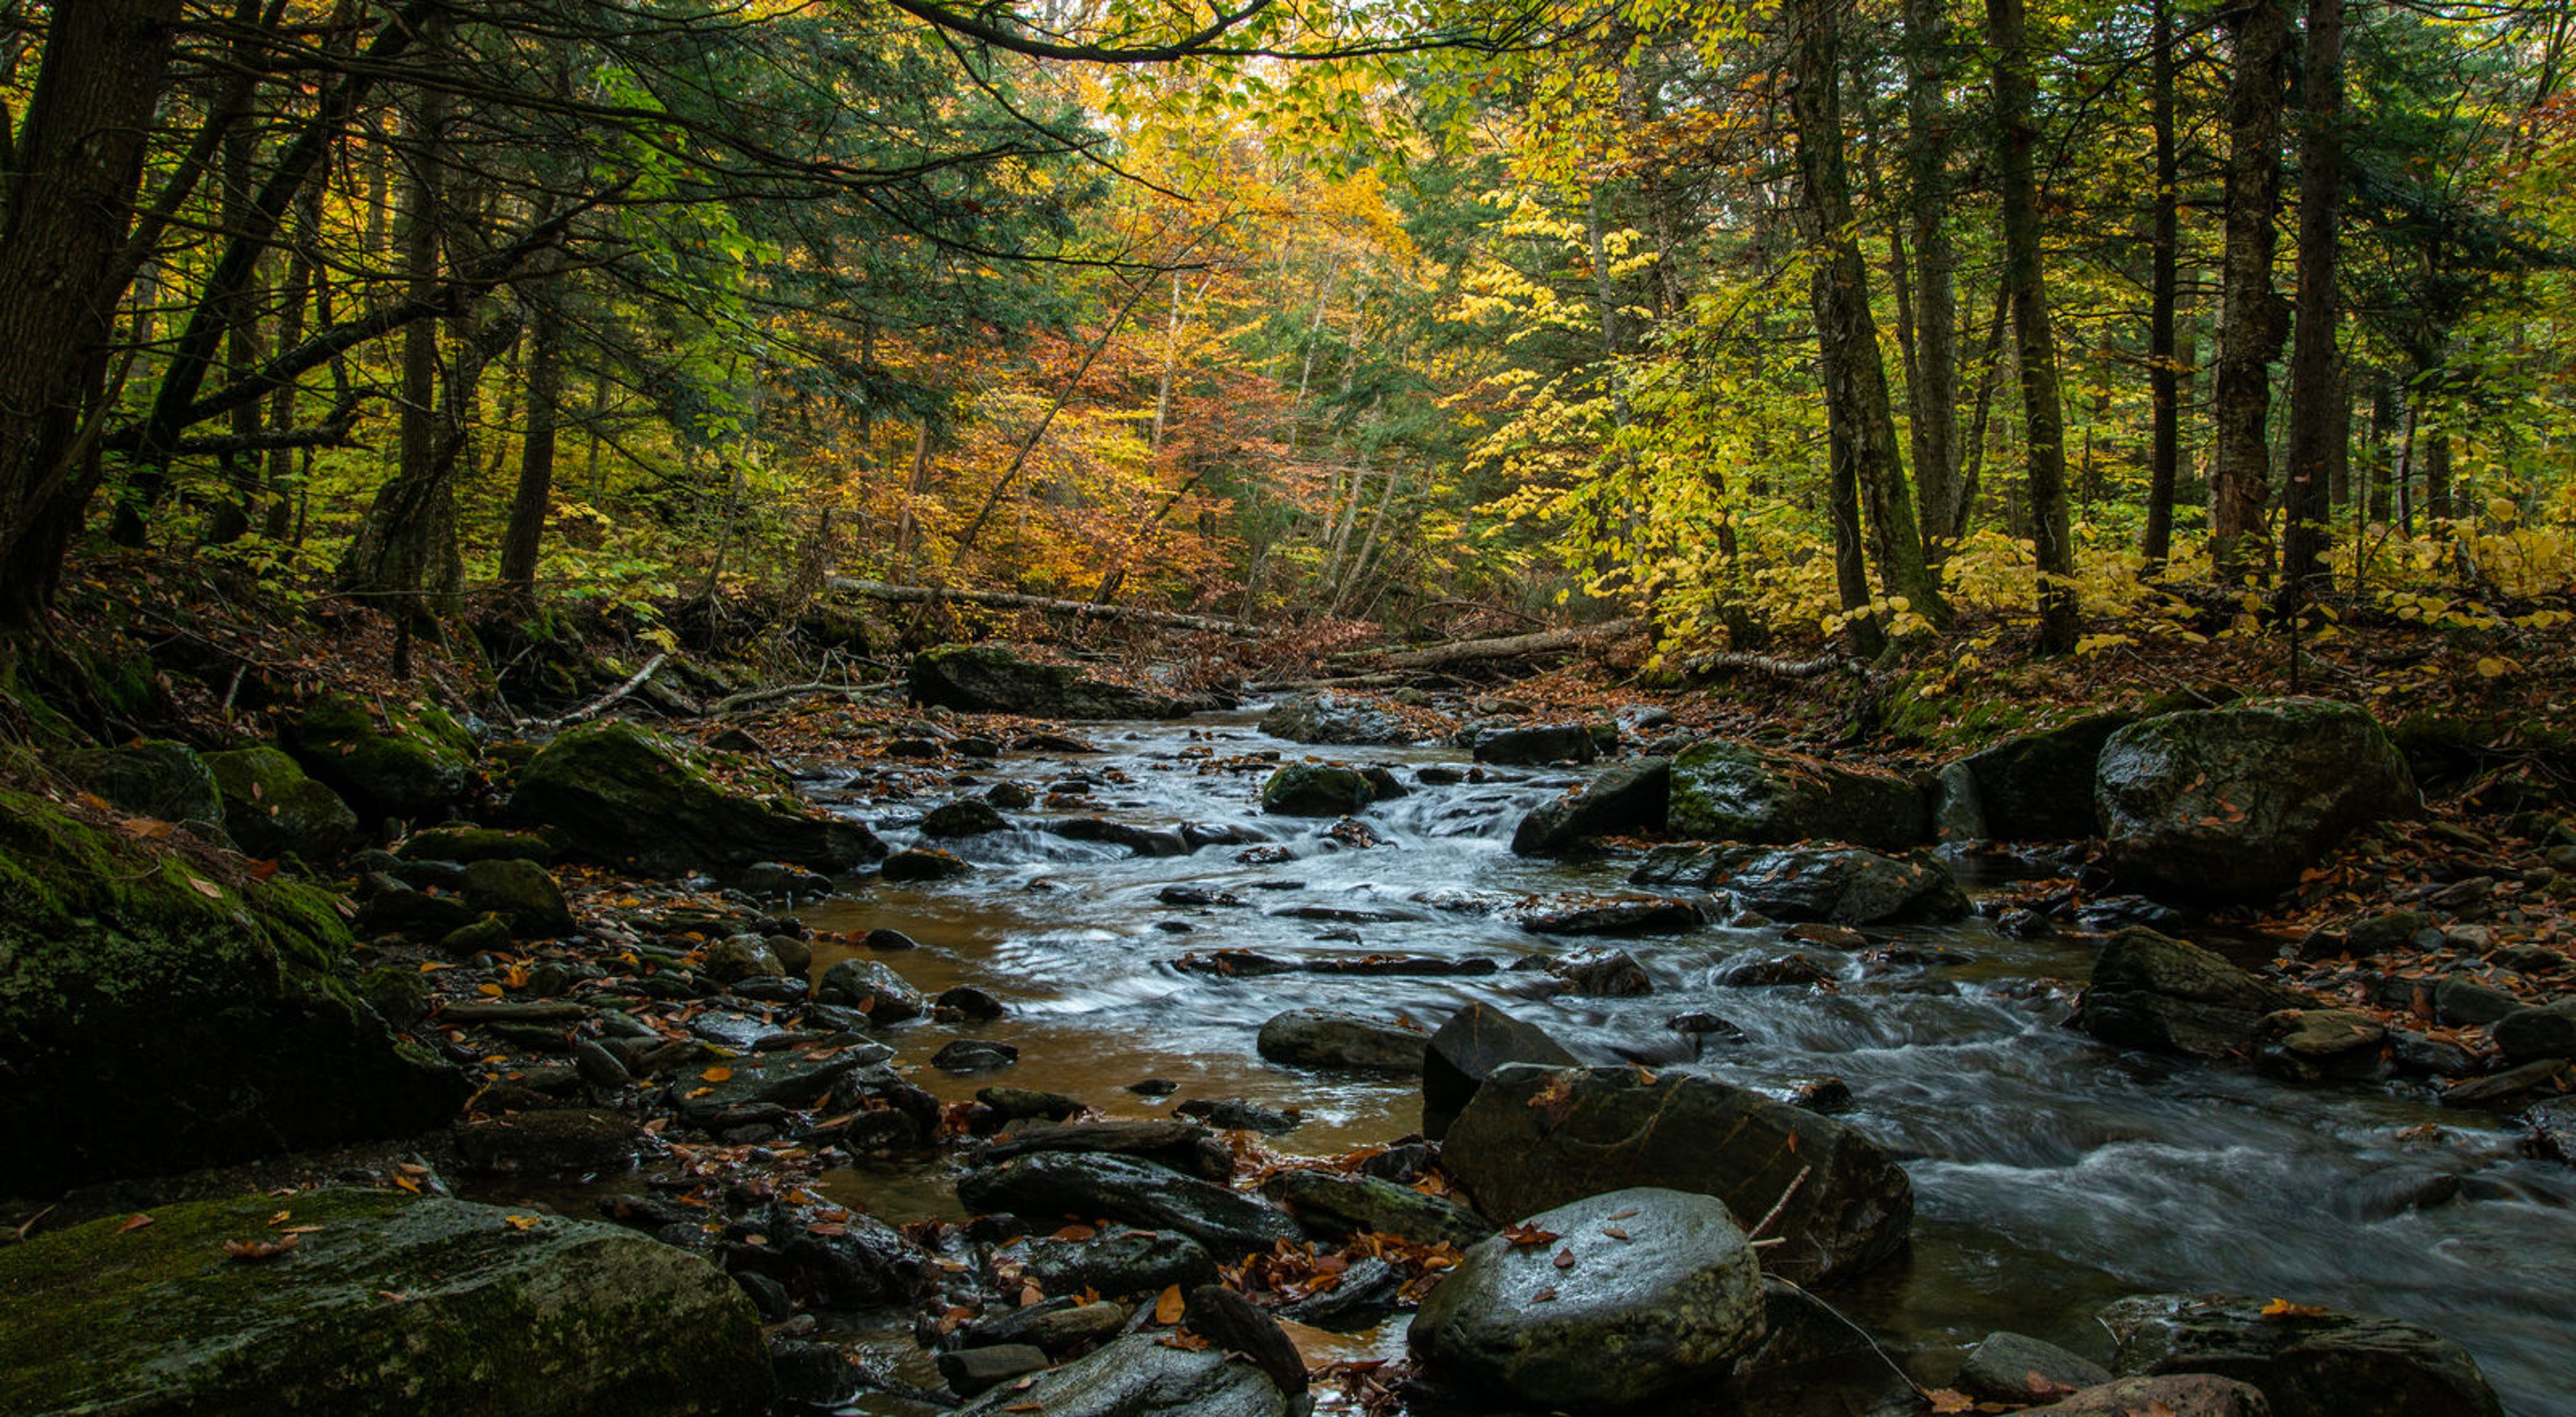 A river with rocks flowing through a forest with fall leaves.